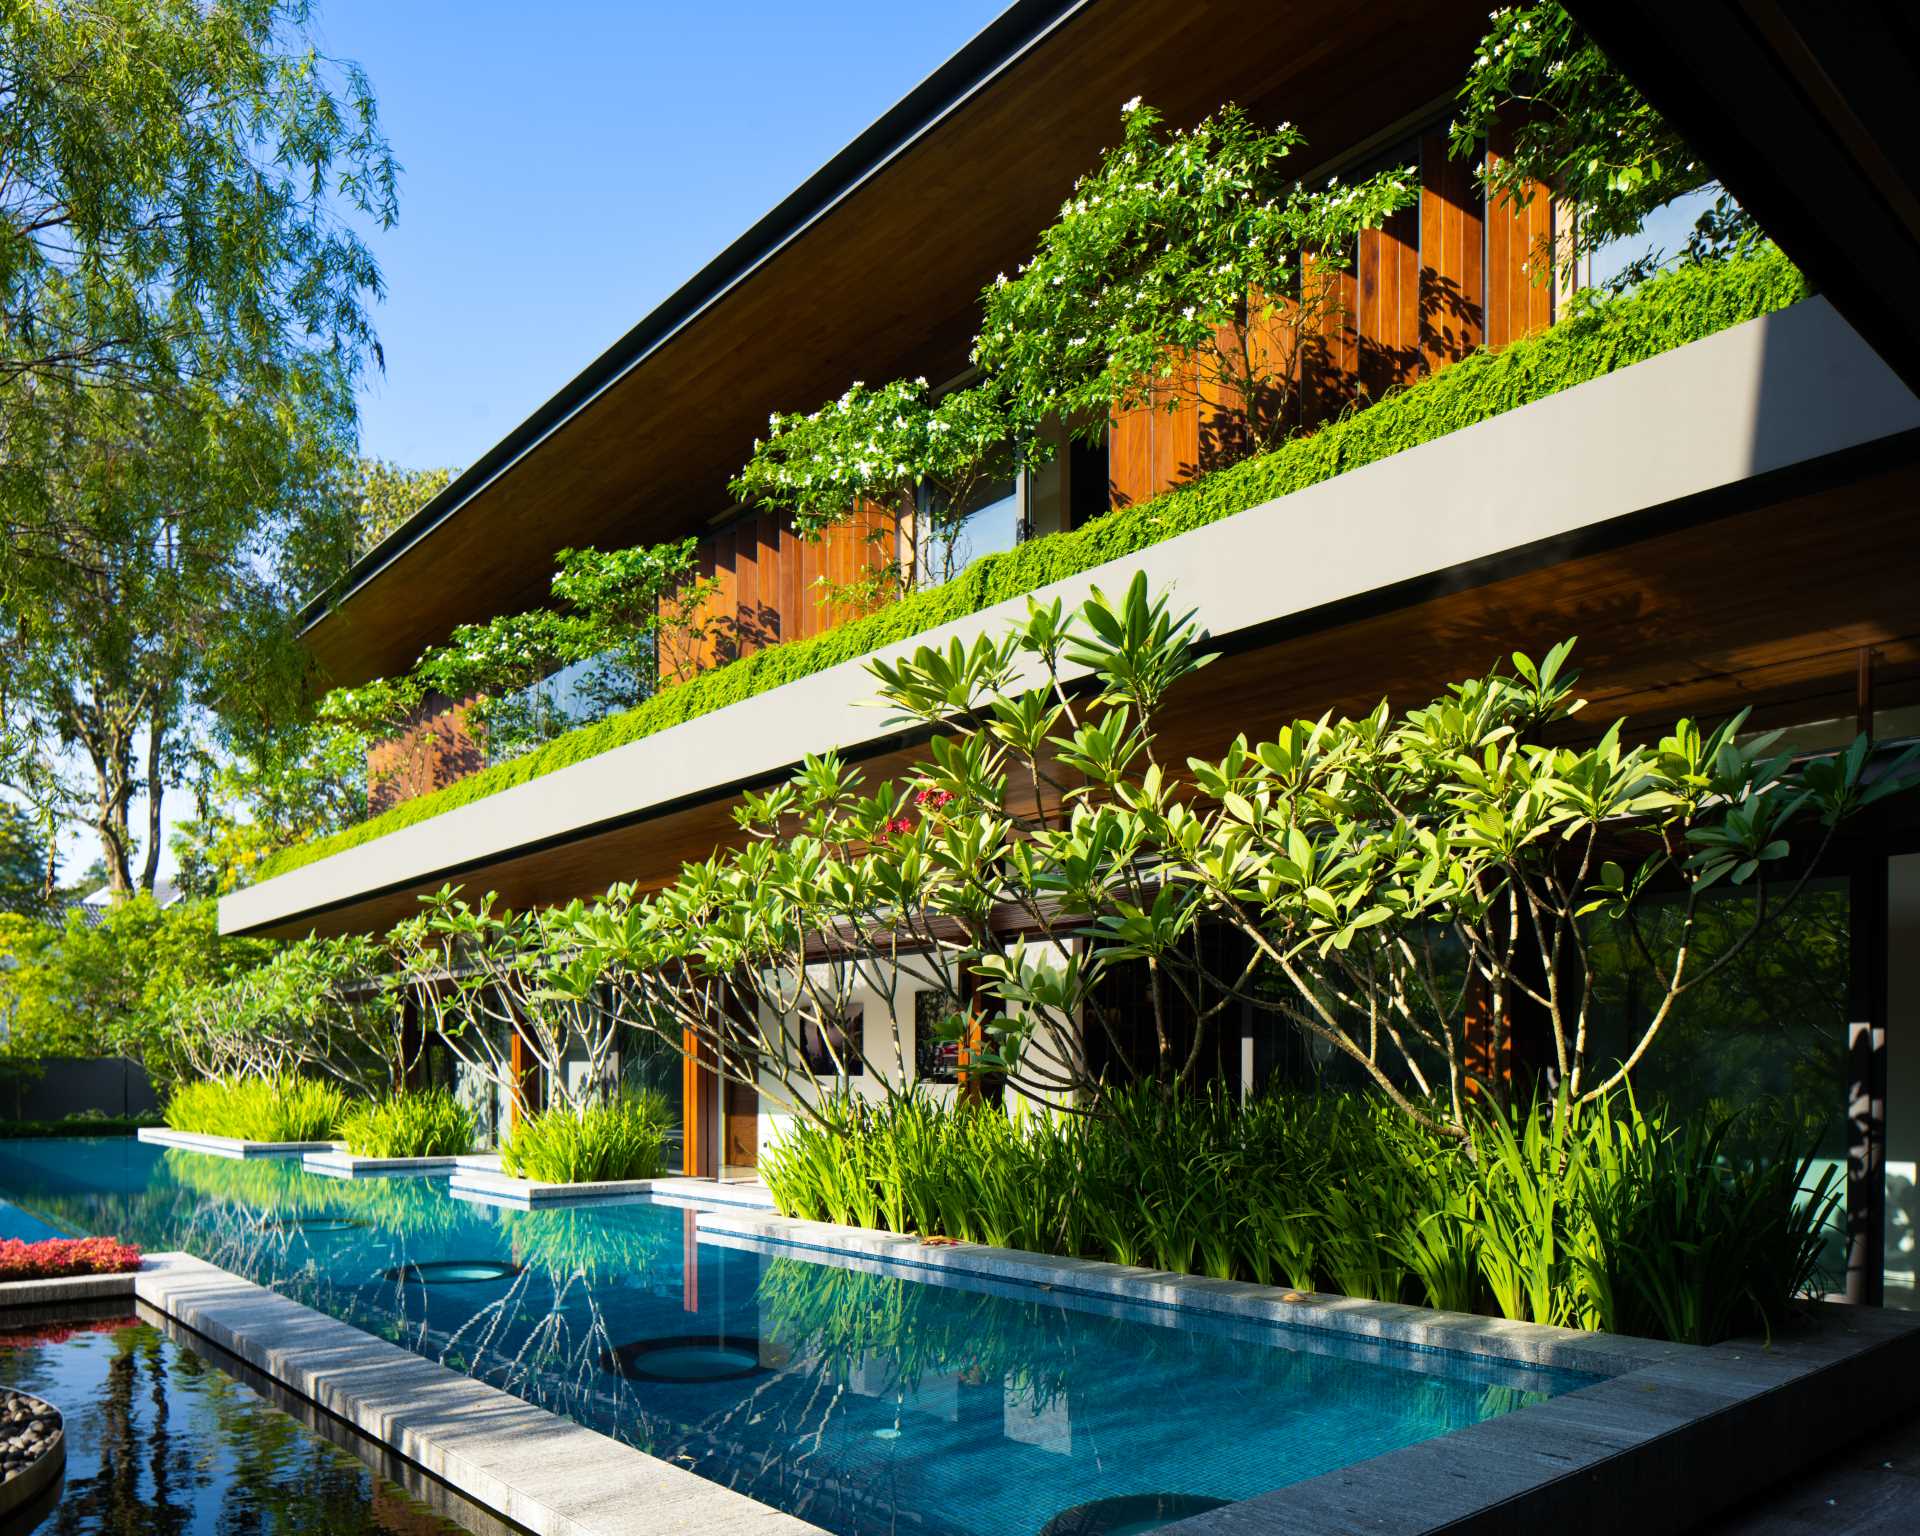 A modern home in Singapore surrounded by plants.